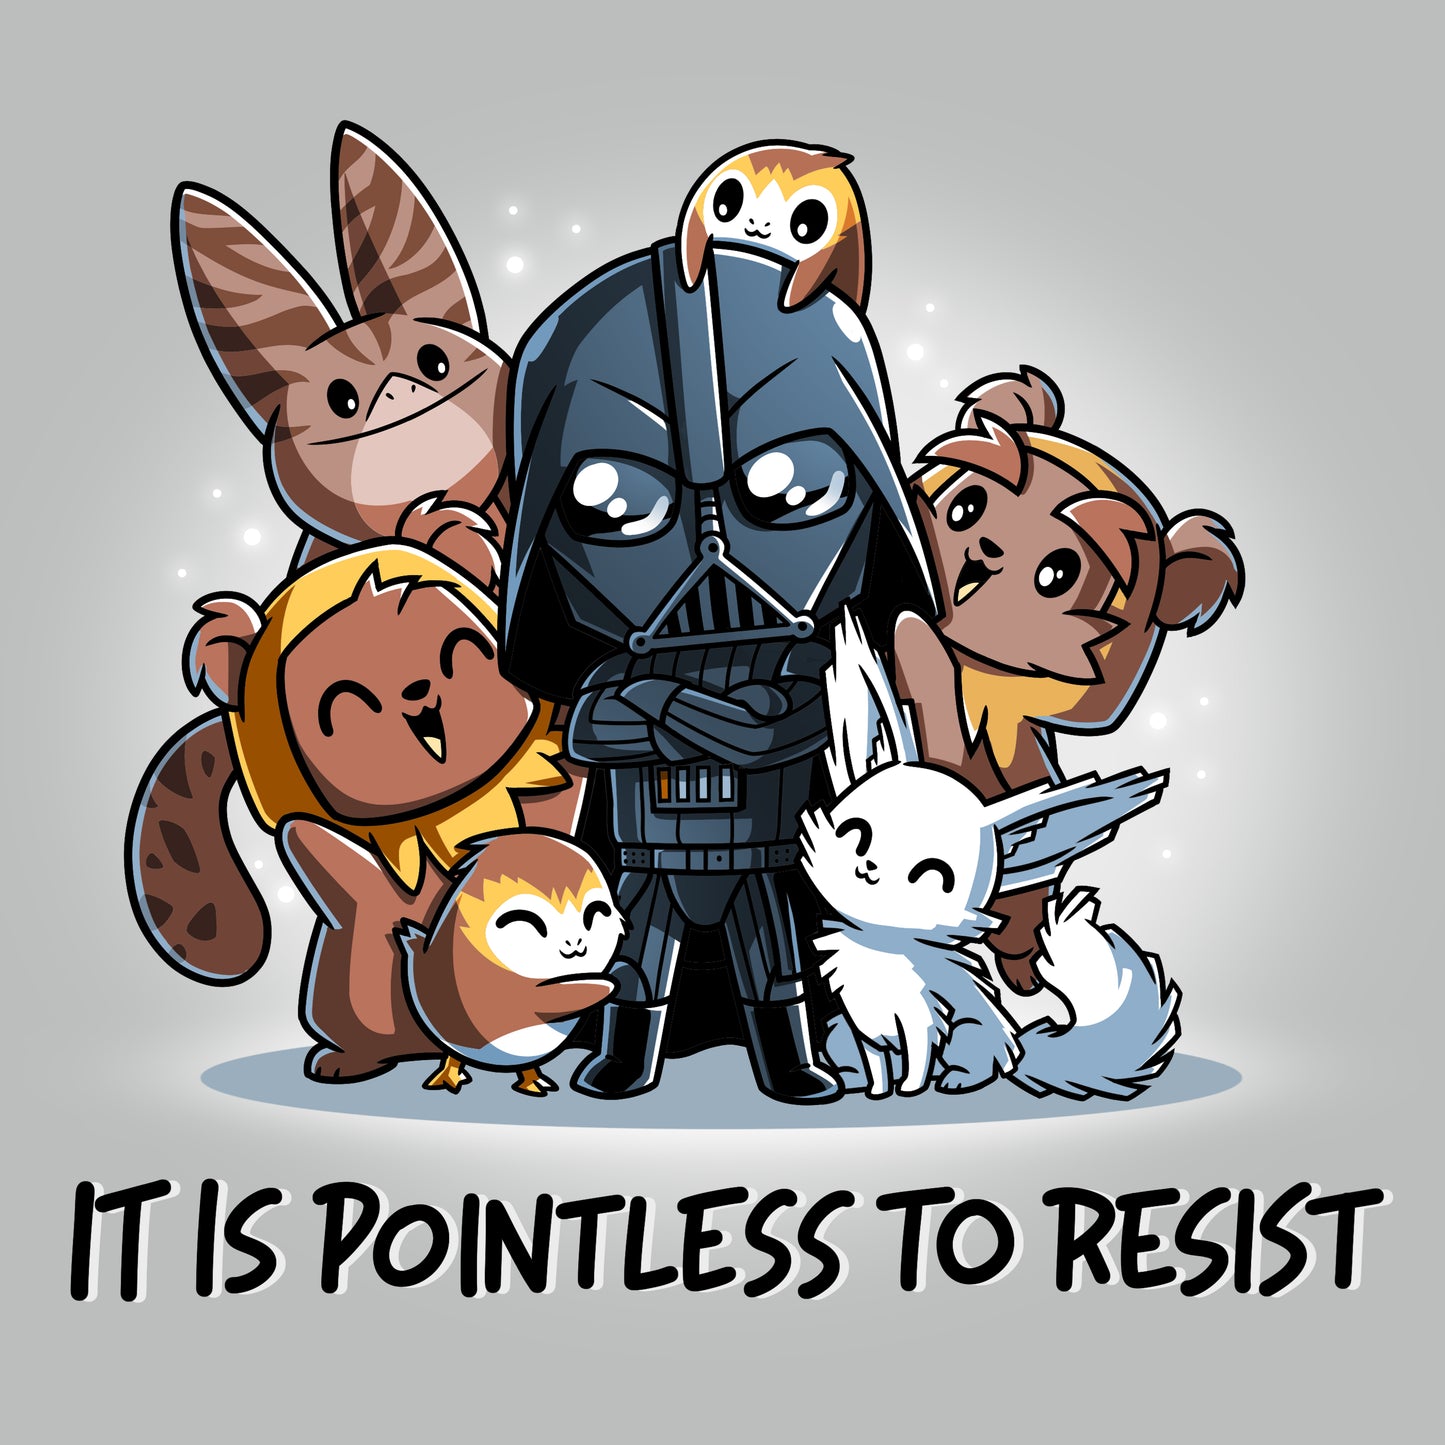 Licensed Star Wars "It Is Pointless to Resist" merchandise made from cotton.